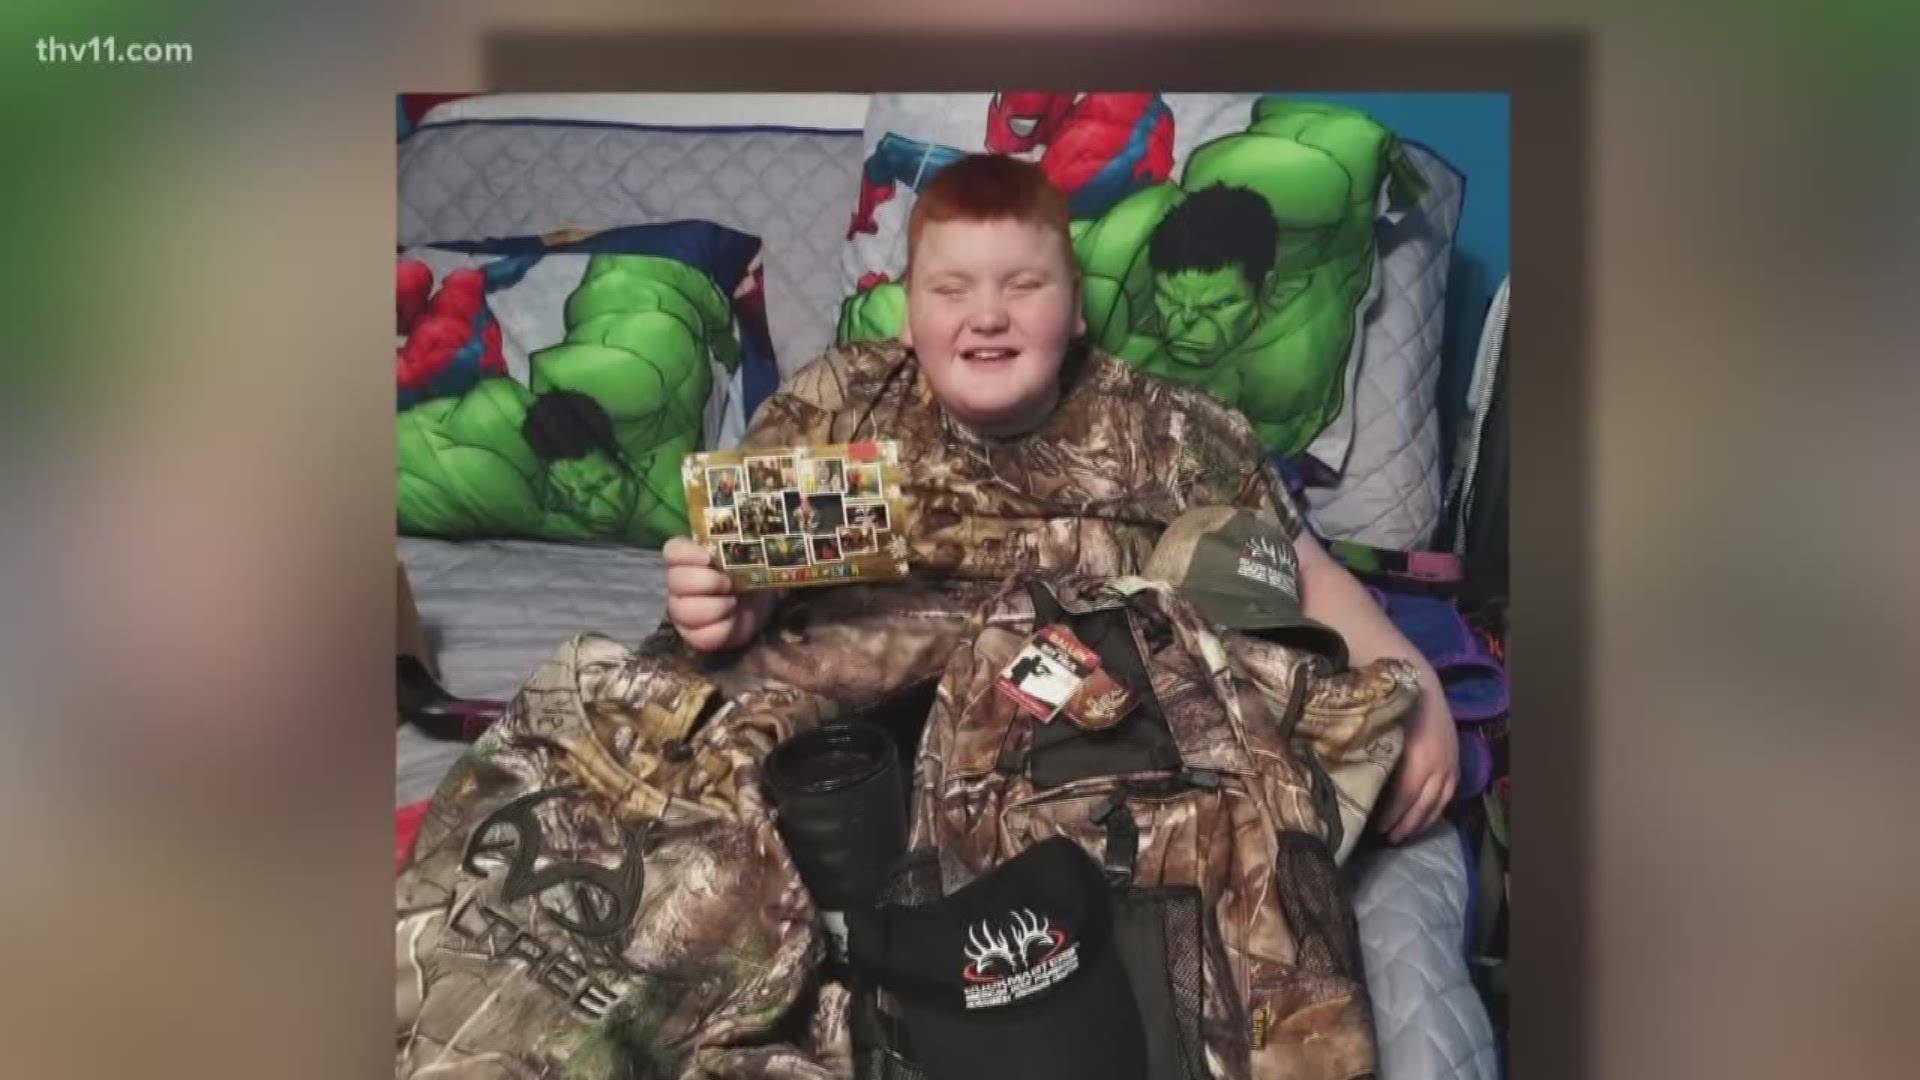 Just before Christmas, an 8-year-old boy lost all his hunting gear to thieves.